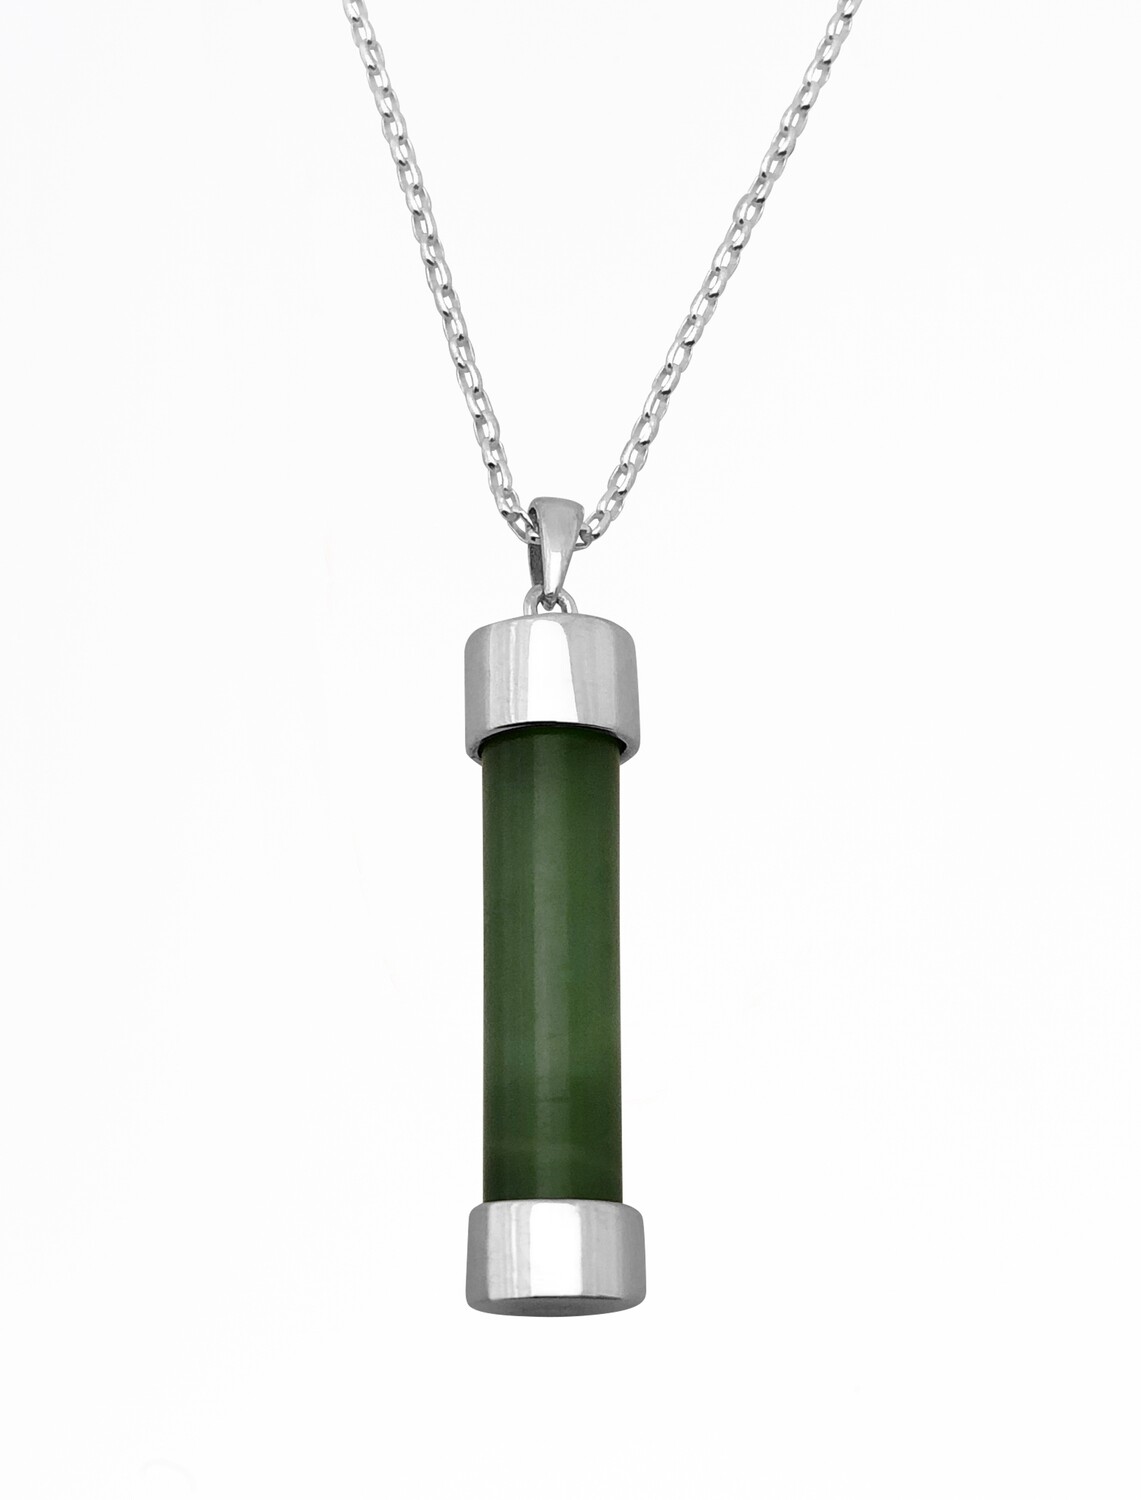 Greenstone and Silver Double Capped Contemporary Pendant - ST8